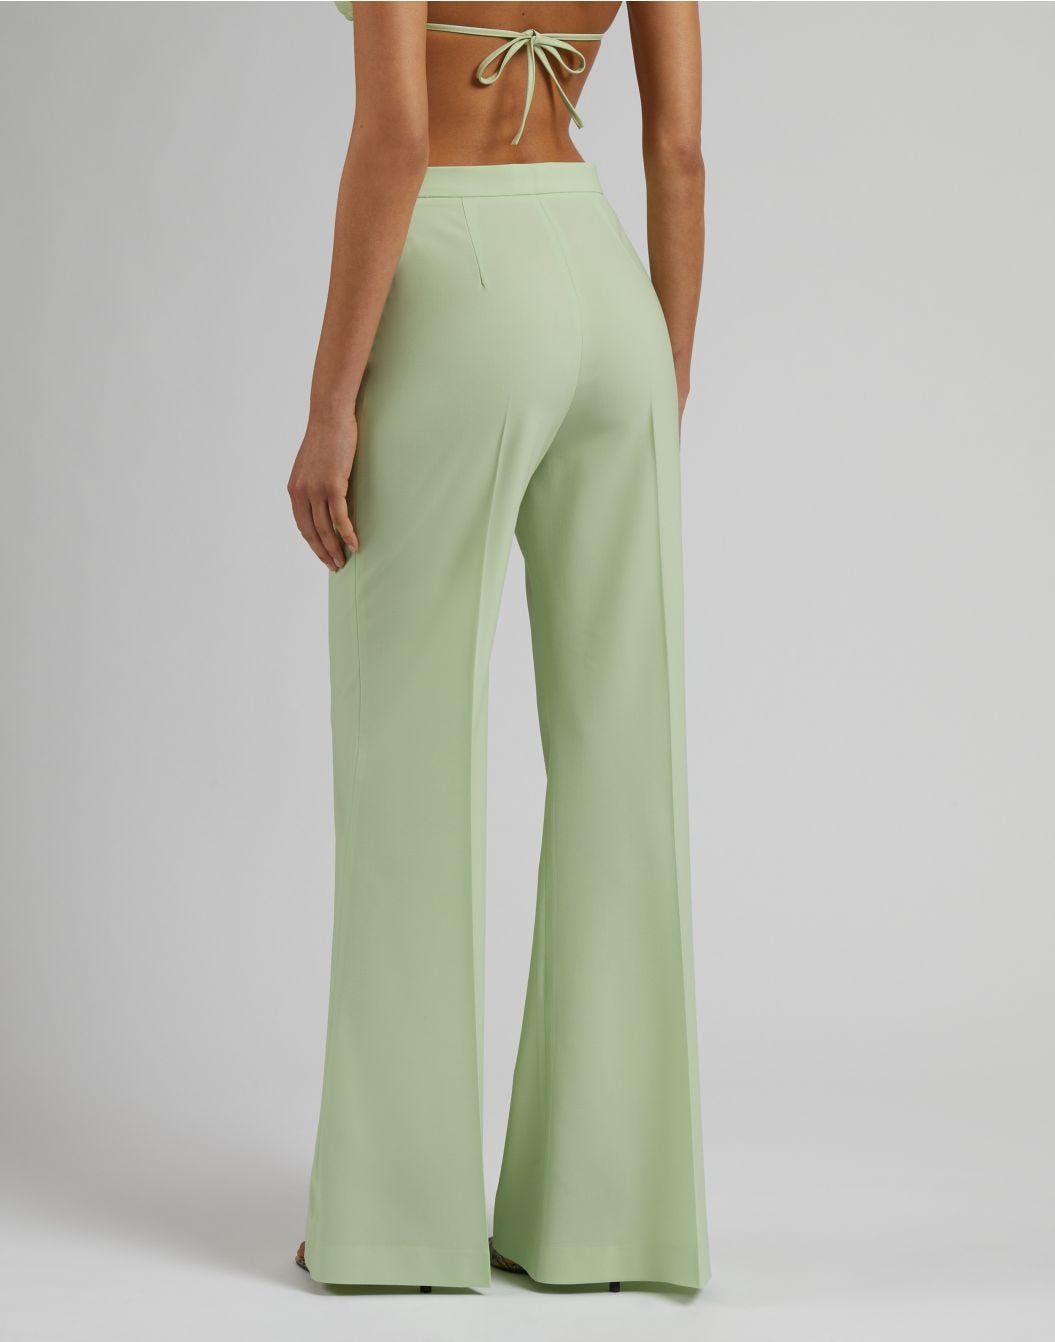 Green high-waisted trousers with a flared hem in stretch wool cloth